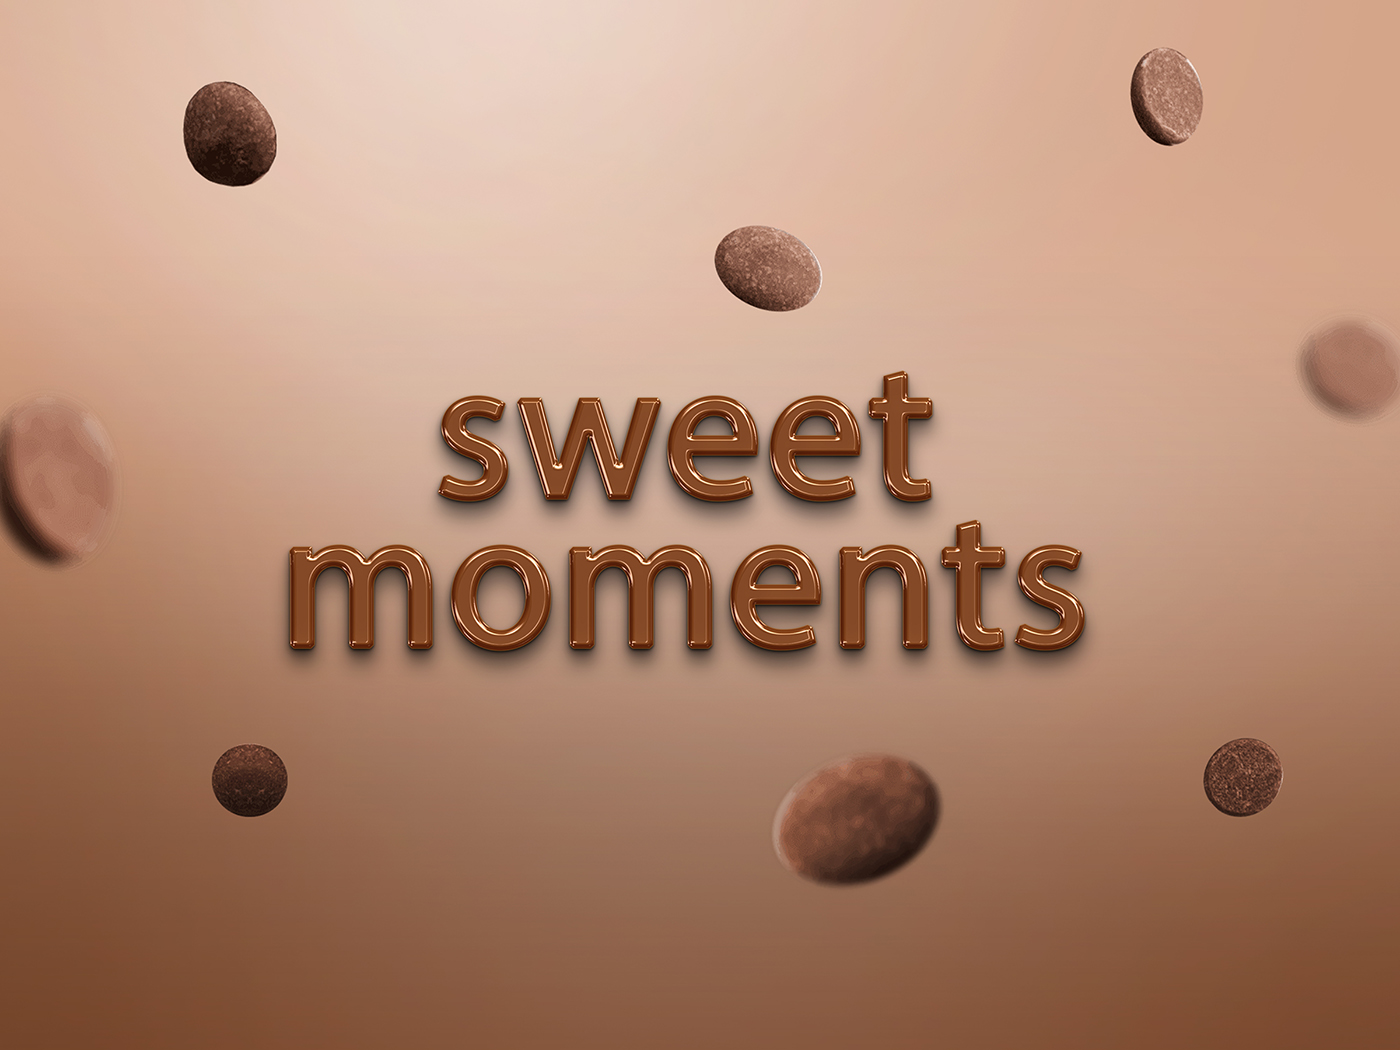 Sweet Moments